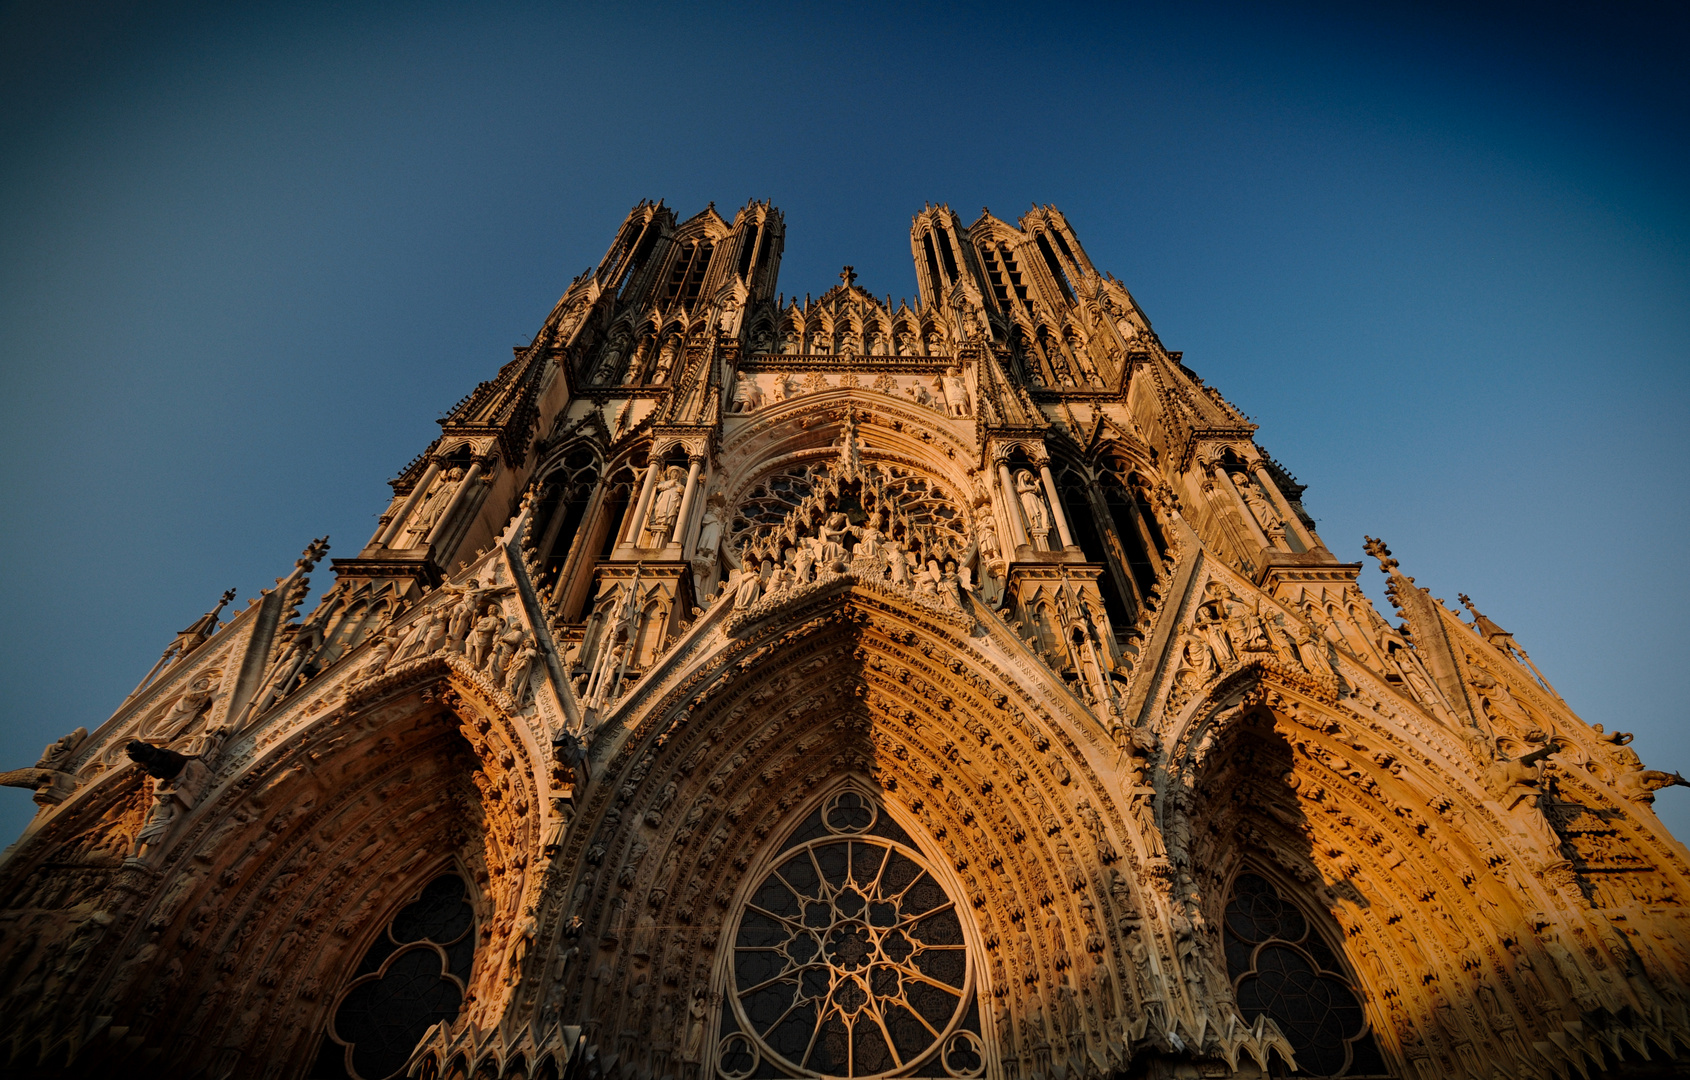 Reims, Kathedrale